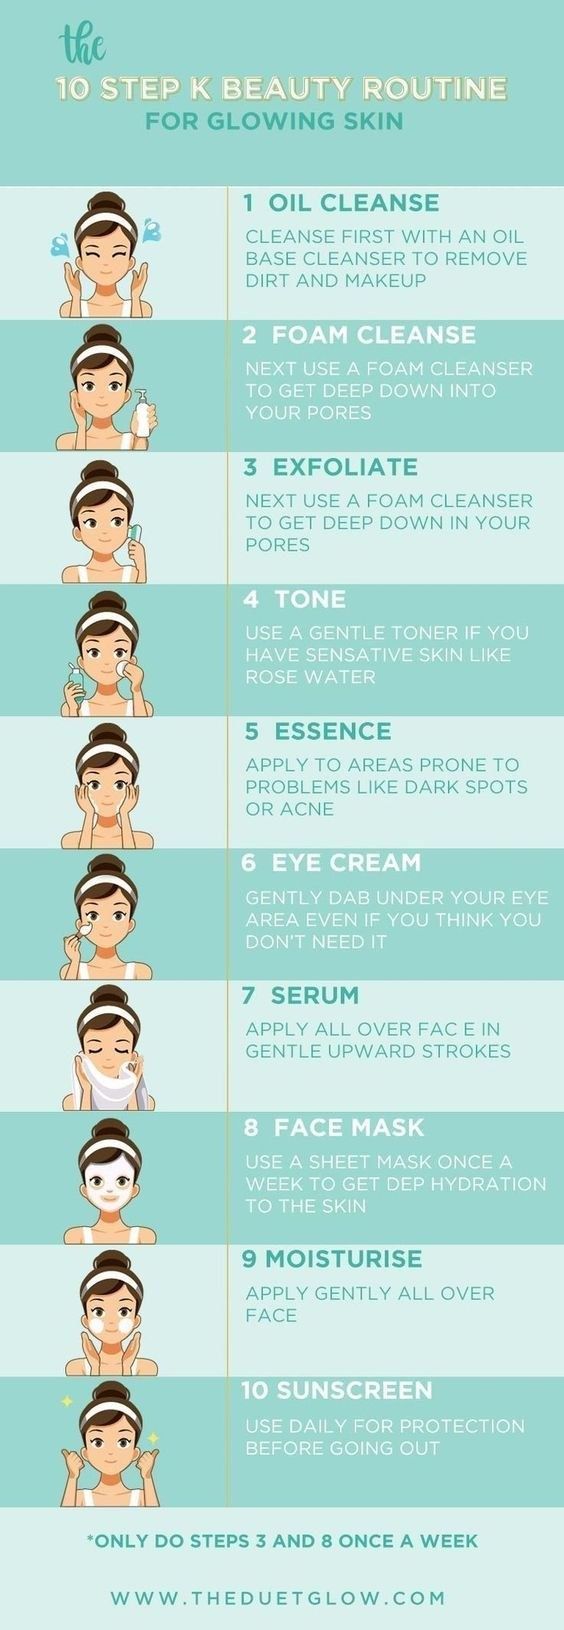 16 Skincare Cheat Sheets That Are Actually Useful - 16 Skincare Cheat Sheets That Are Actually Useful -   15 korean beauty Routines ideas